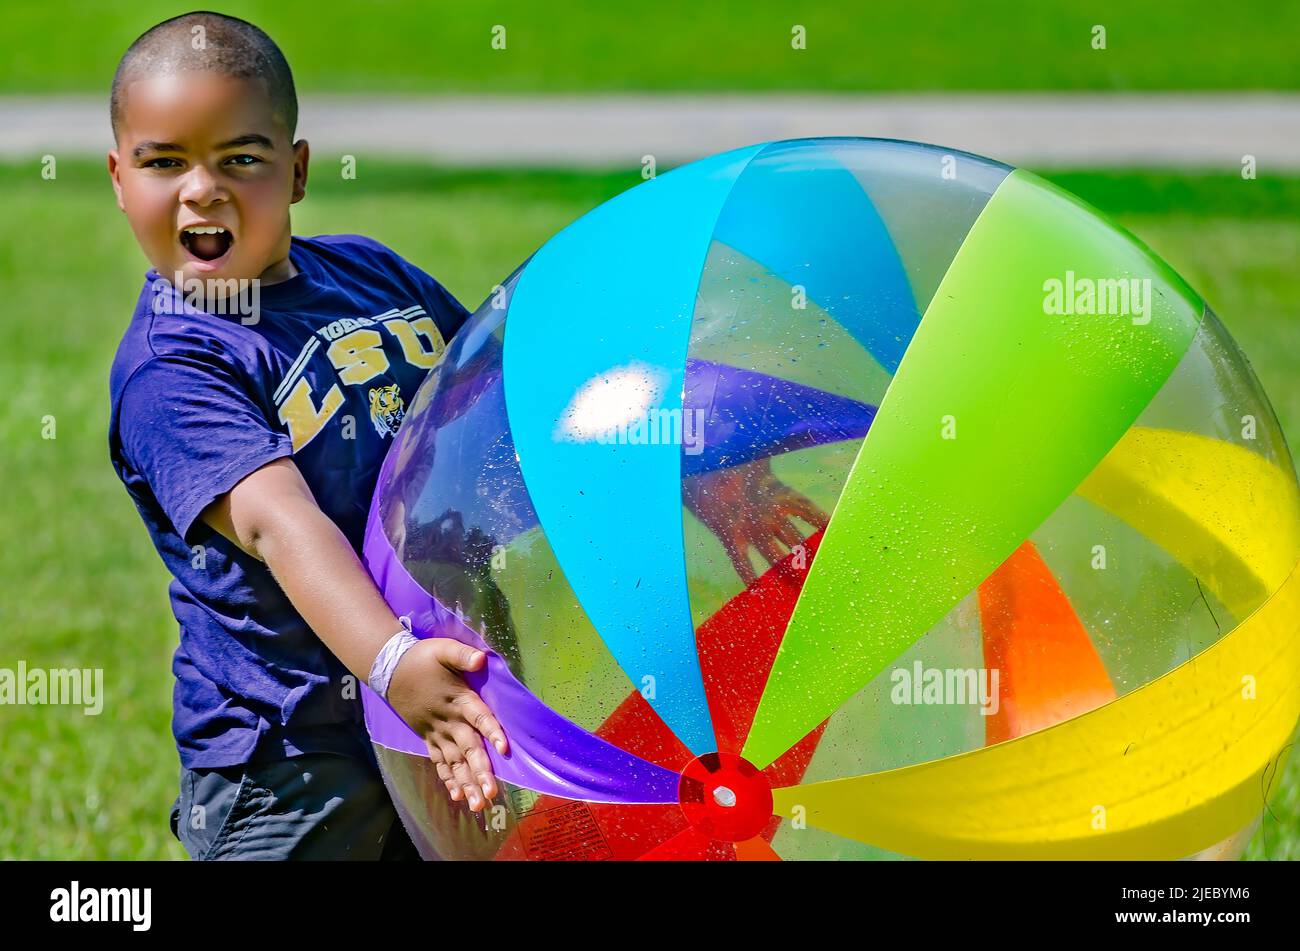 A young African-American boy plays with a giant beach ball, July 27, 2012, in Columbus, Mississippi. Stock Photo